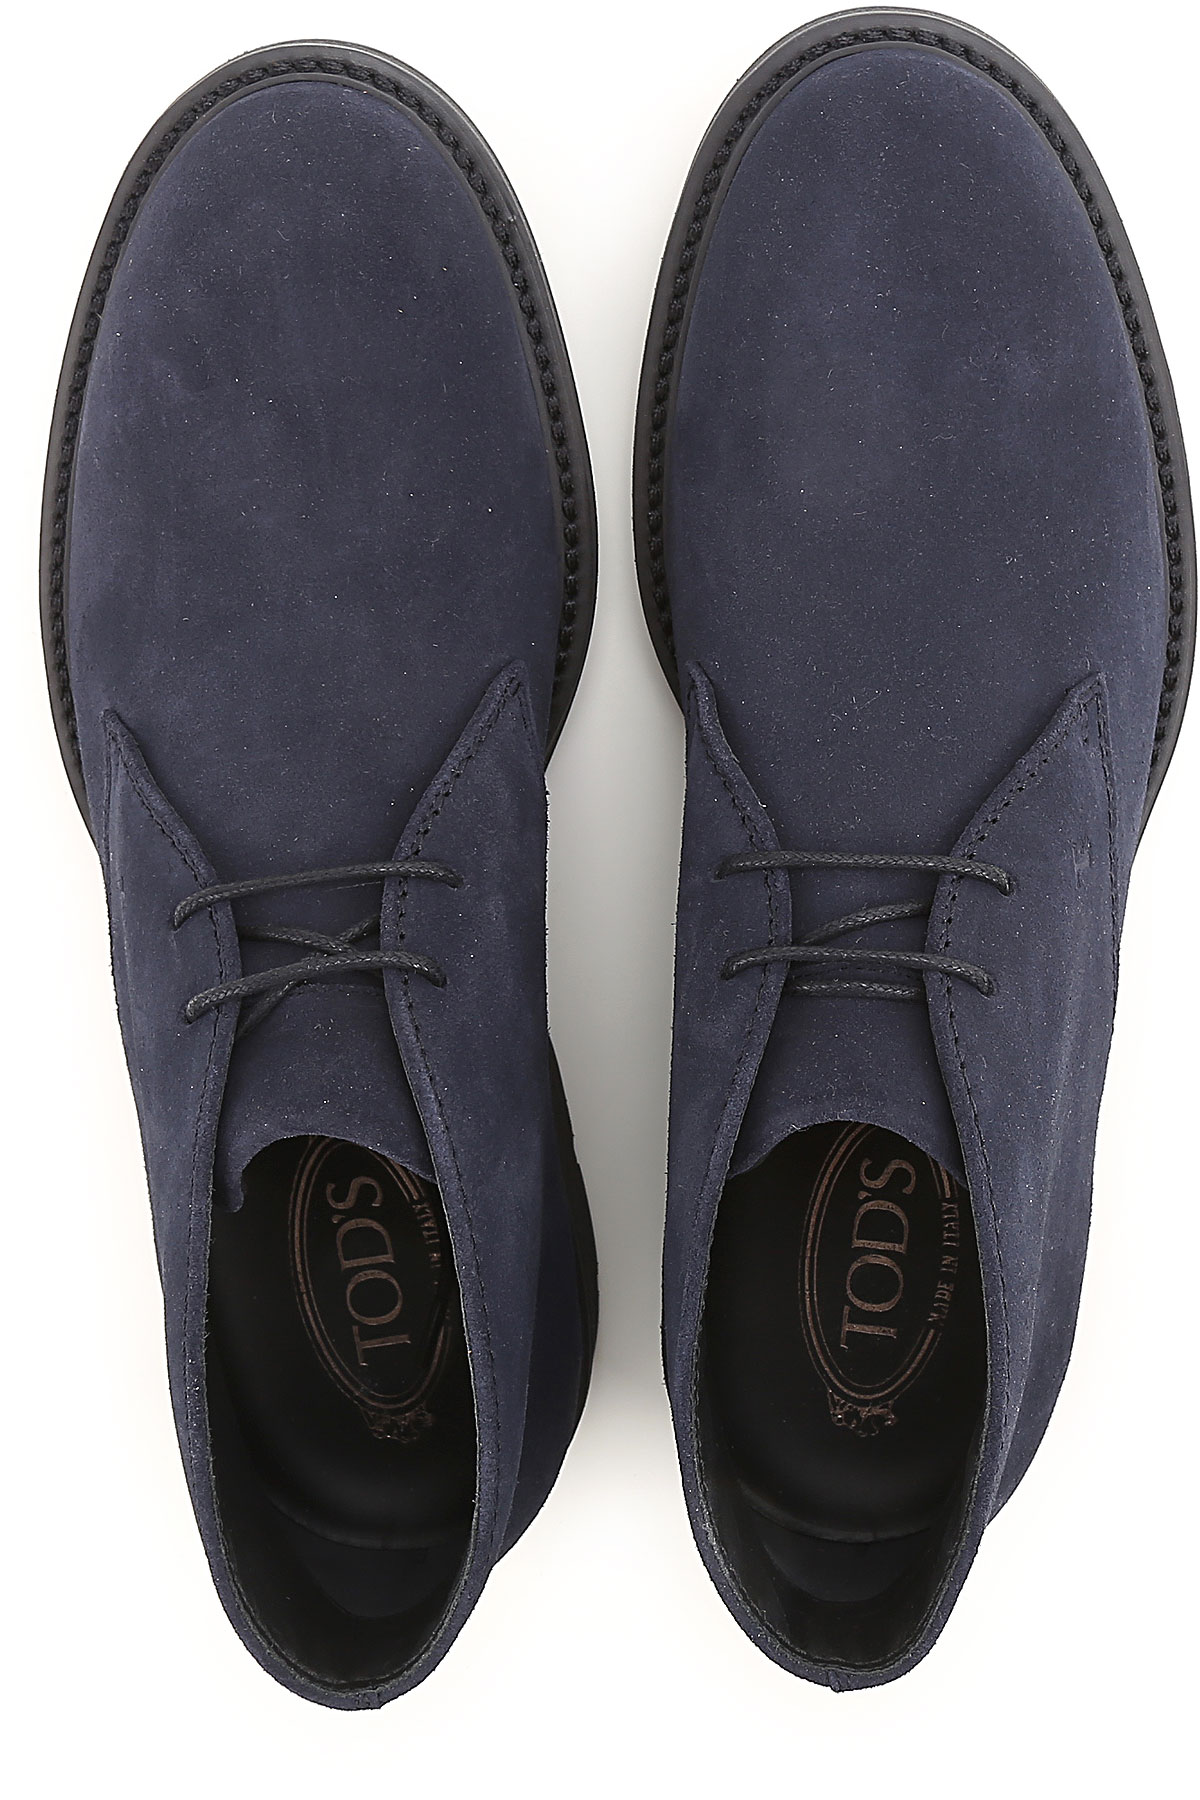 Mens Shoes Tods, Style code 